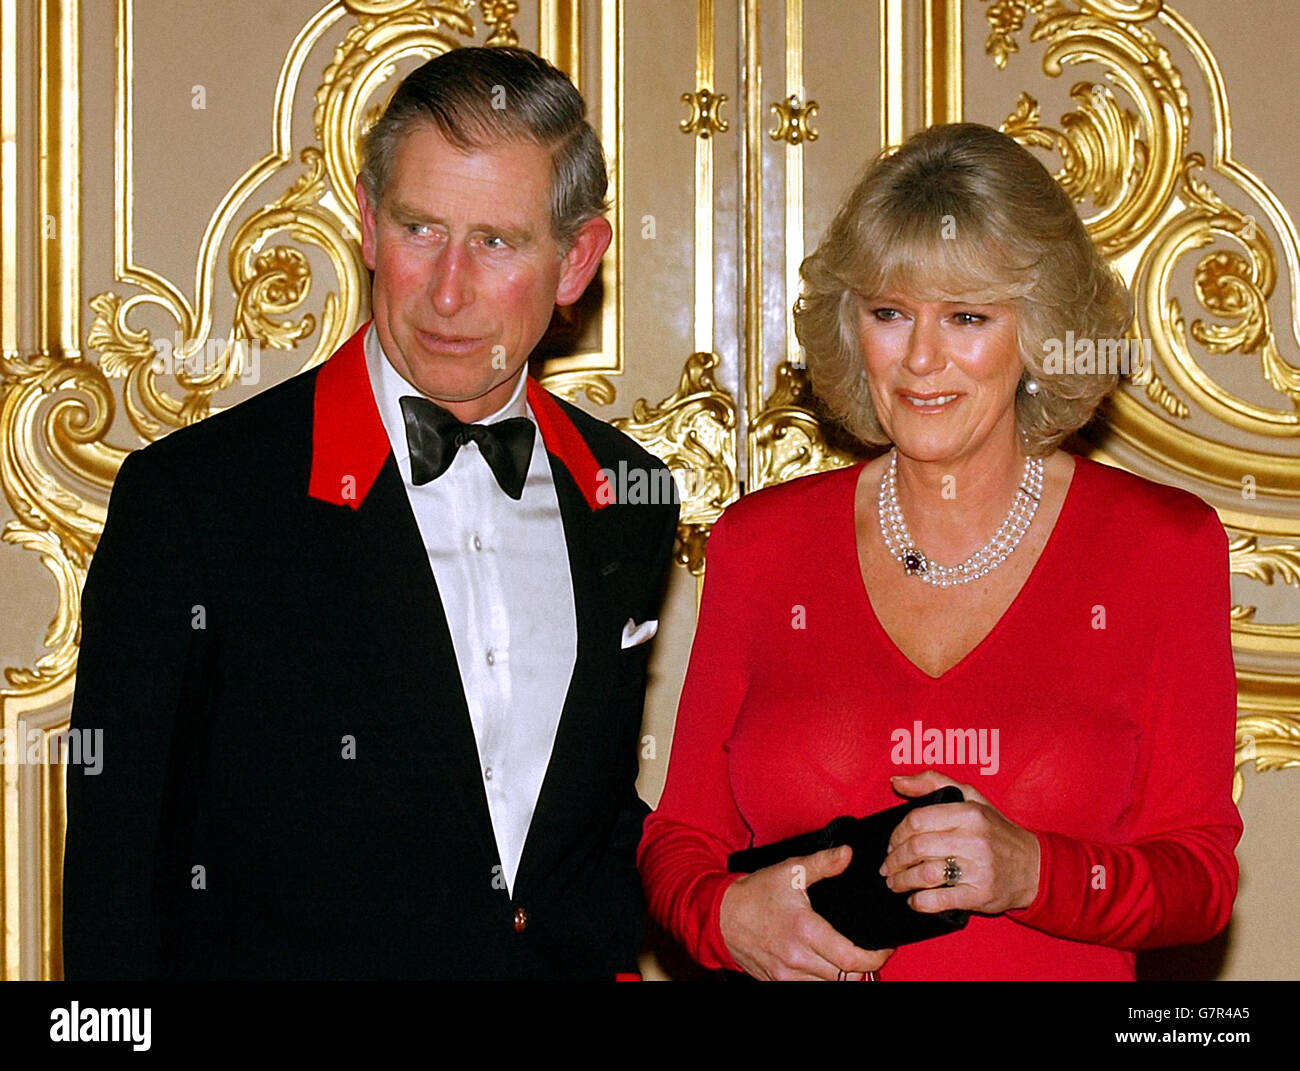 The Prince of Wales and his fiance Camilla Parker Bowles in the grand ...